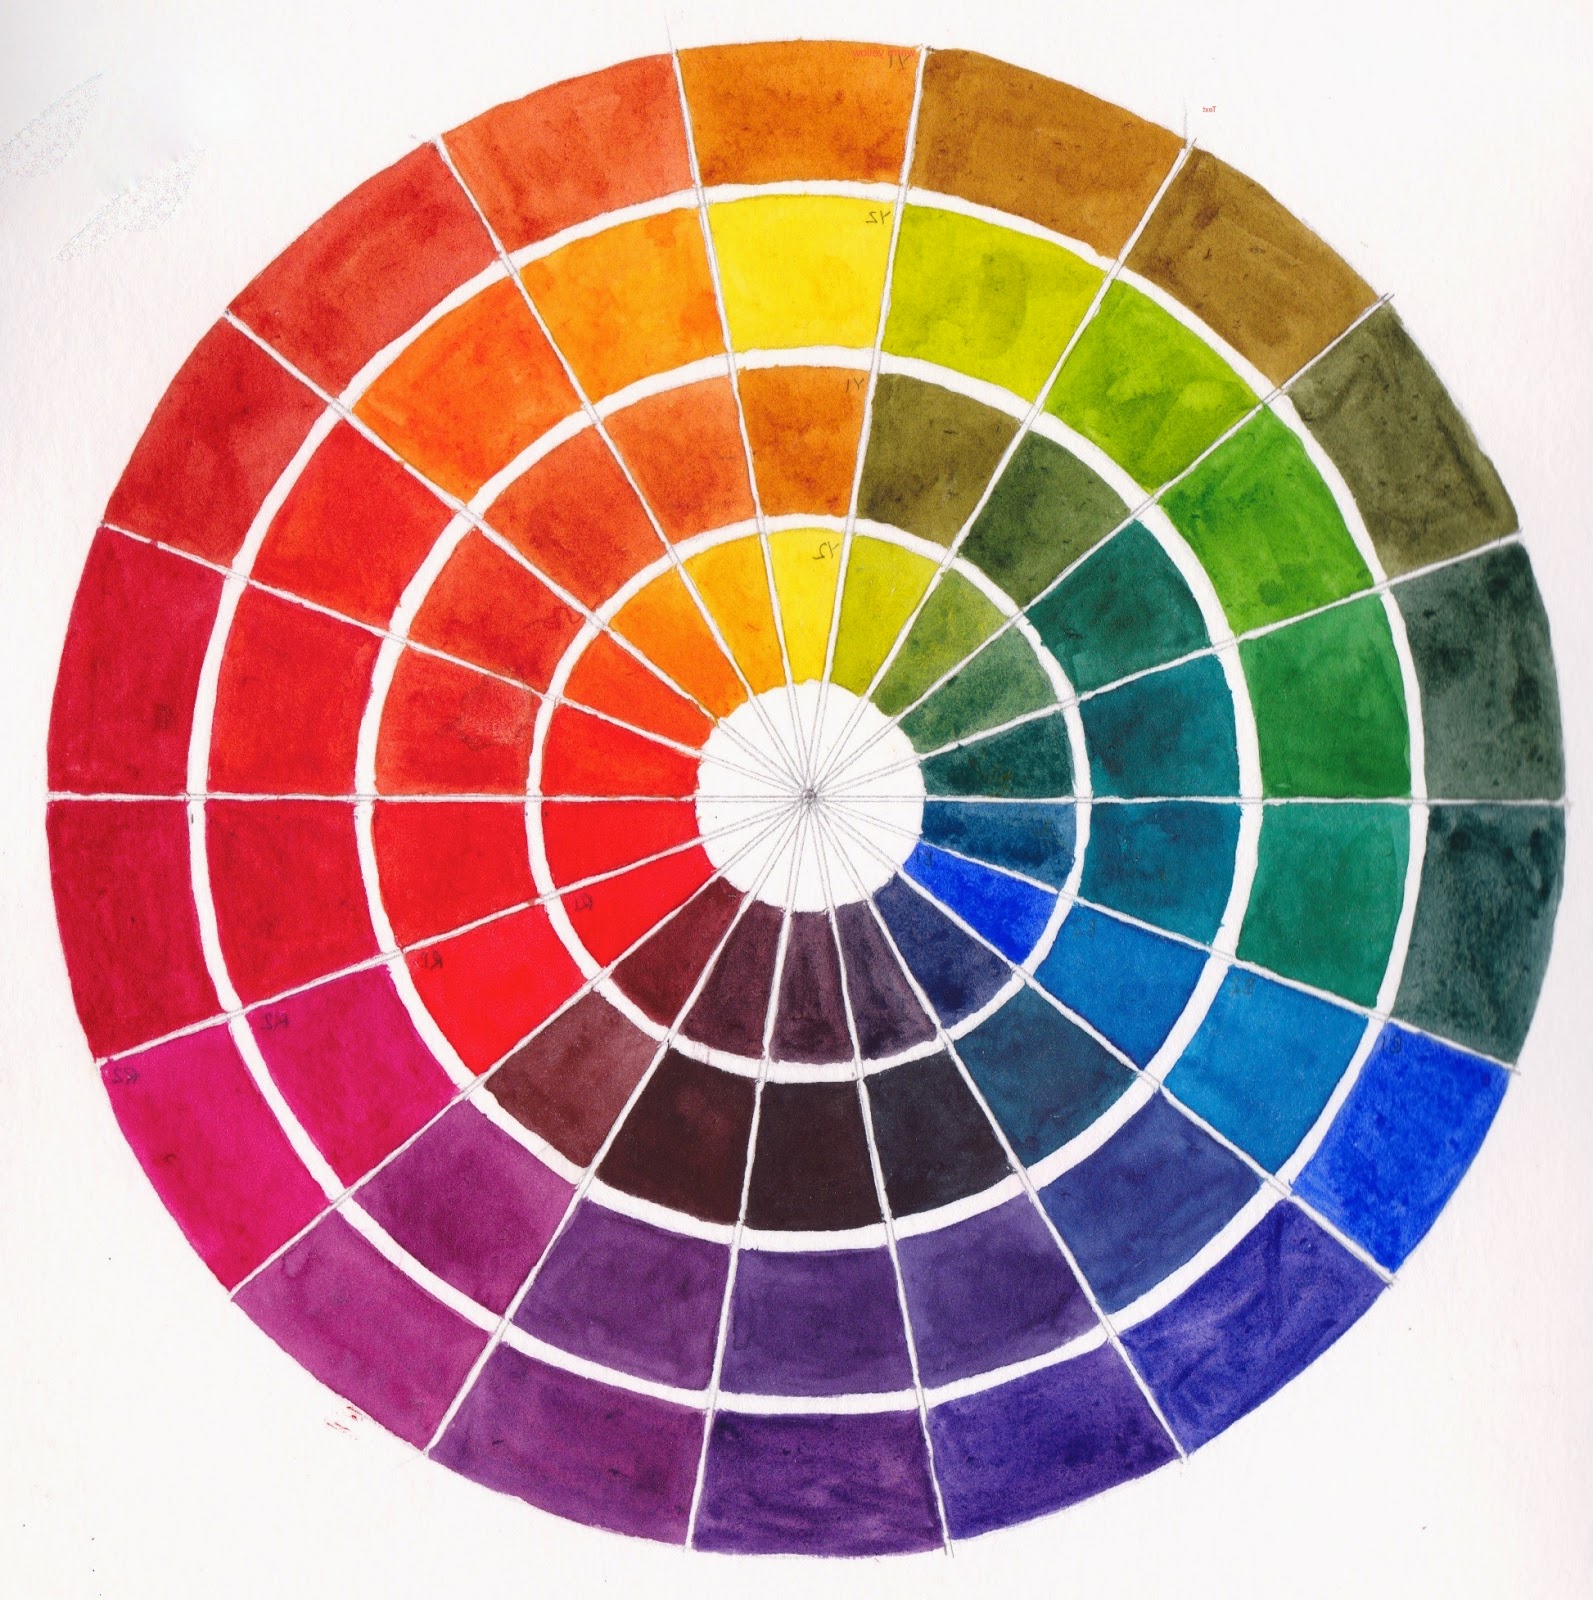 Color Wheel for mac download free